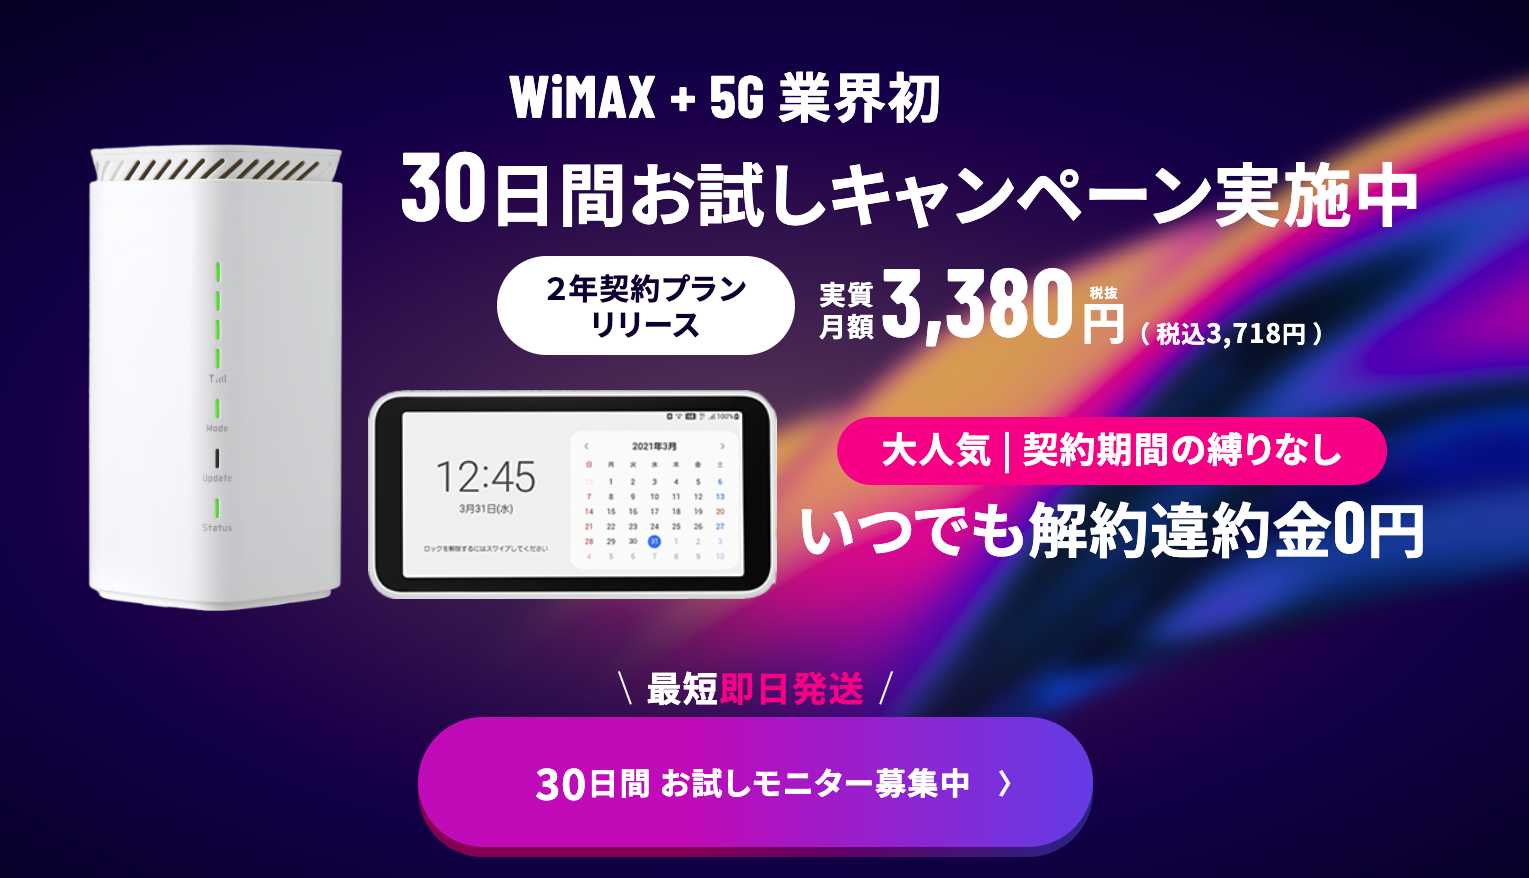 5G CONNECT WiMAXが会社のバナー画像